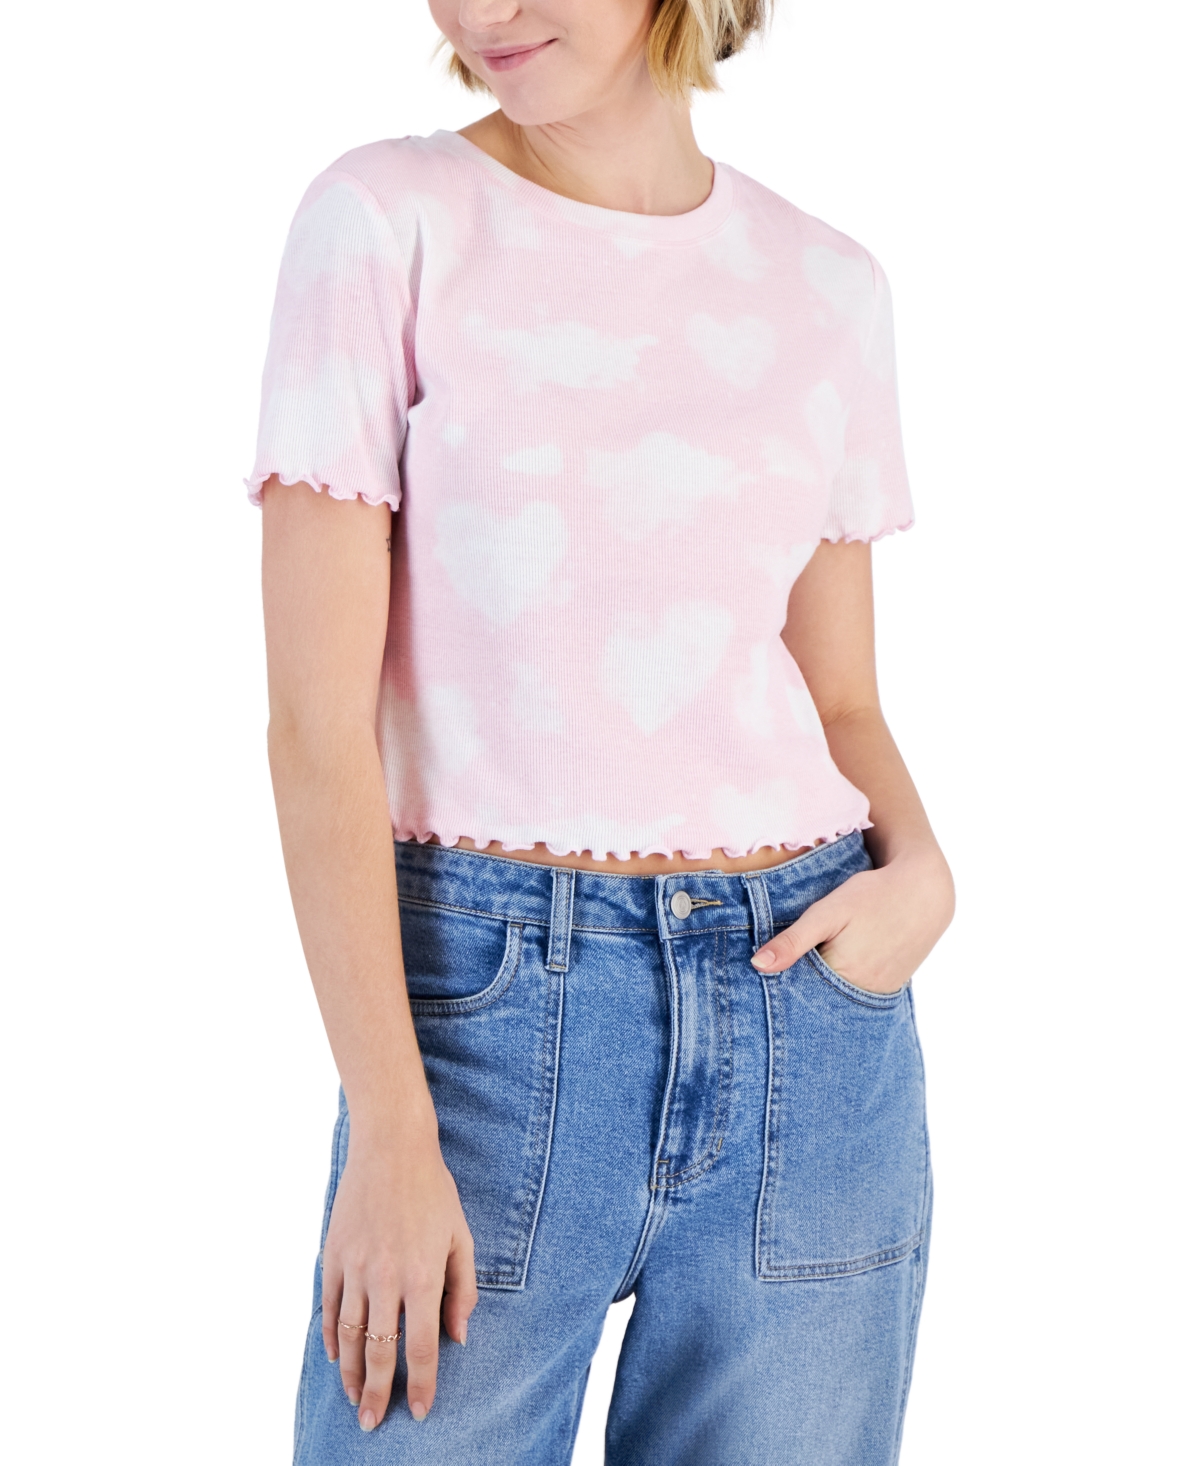 Grayson Threads, The Label Juniors' Heart Cloud Lettuce-edge Top In Pink